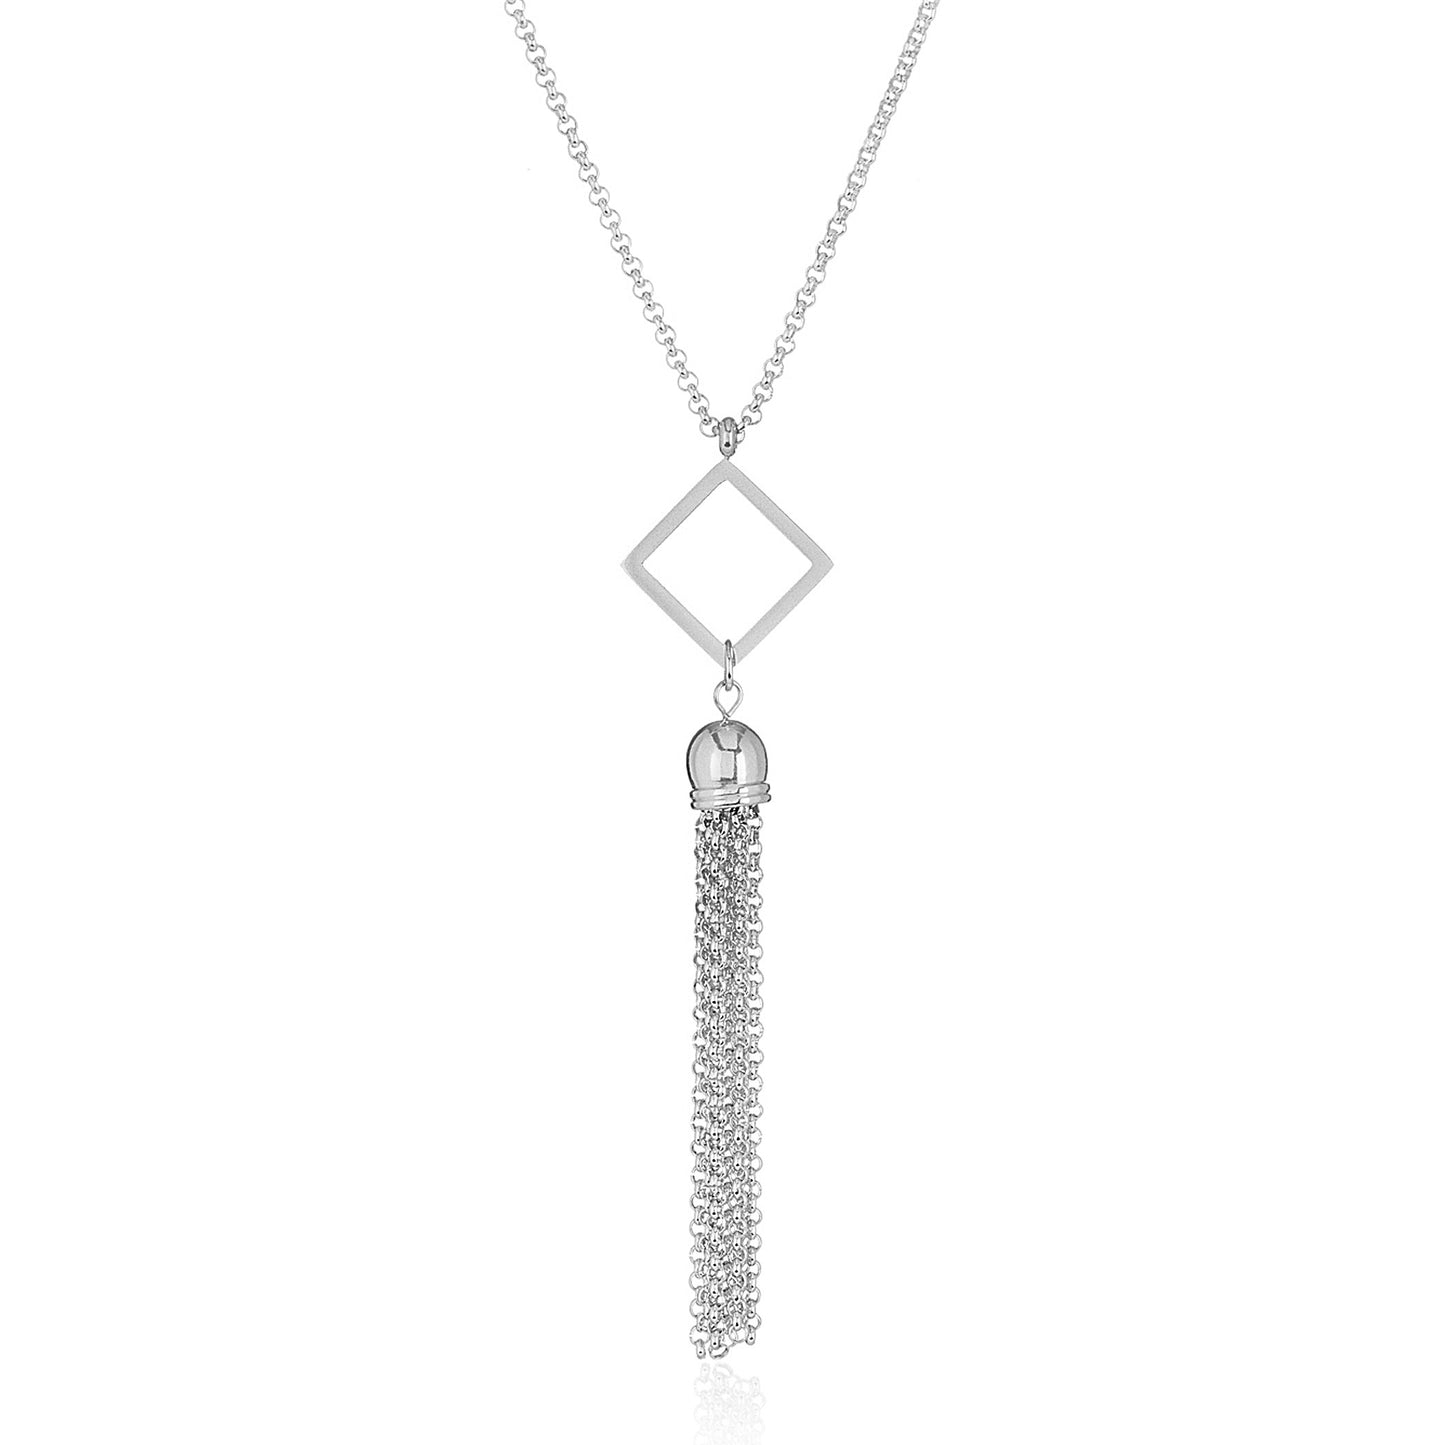 ELYA High Polished Open Diamond Tassel Stainless Steel Rolo Chain Pendant Necklace - 23"